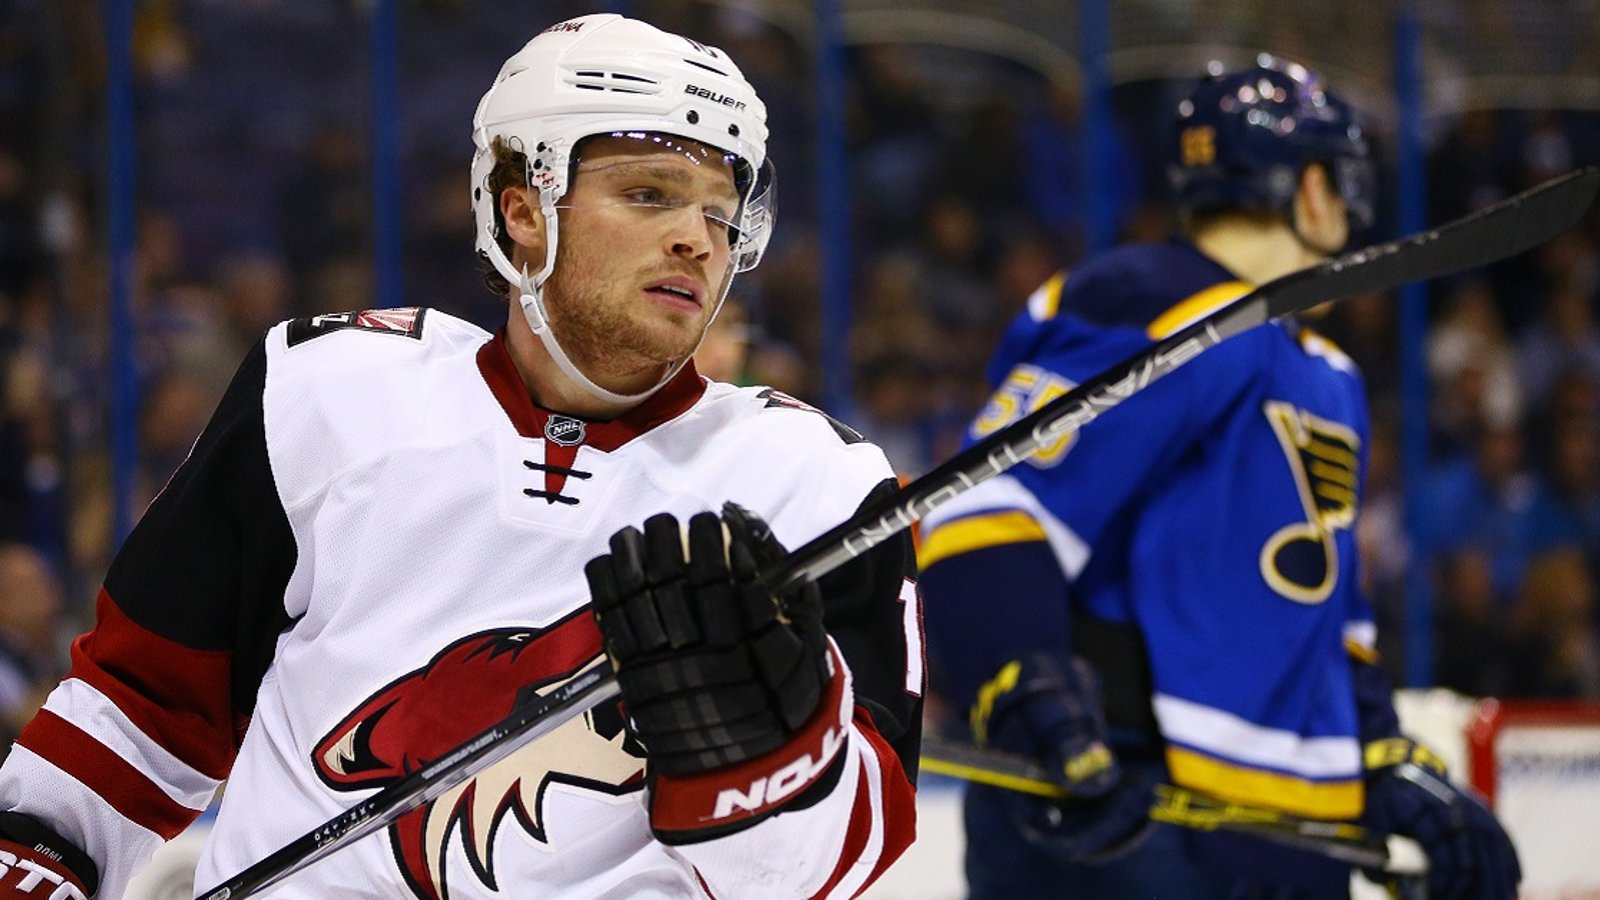 Report: Max Domi to miss significant time after injuring his hand in a fight.